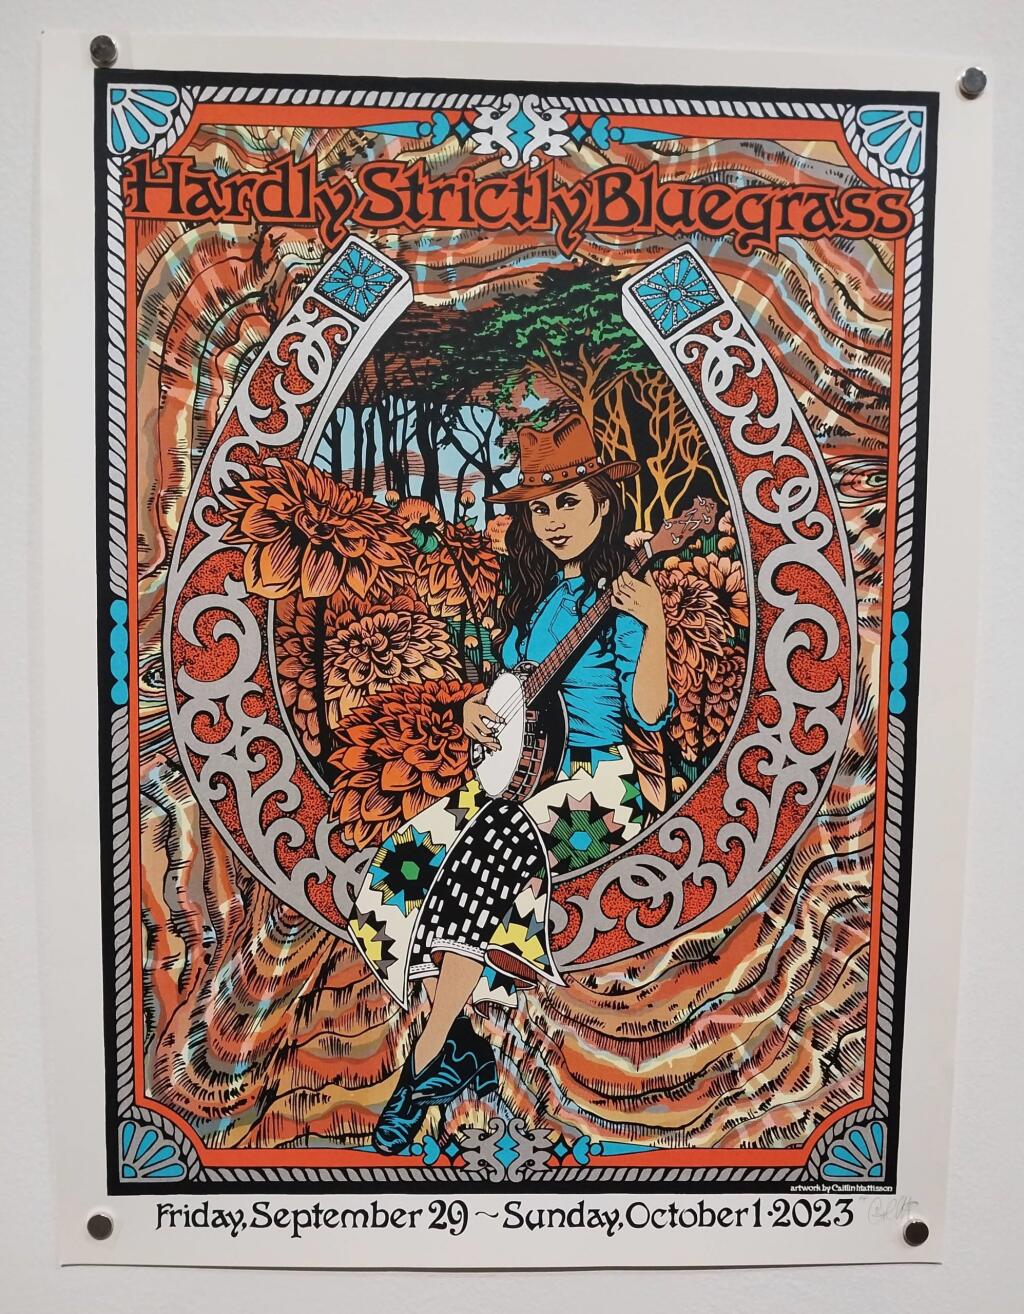 Works by Caitlin Mattisson are on display as part of “Women of Rock,” and exhibition of rock ‘n roll art by women artists. (Courtesy of the Haight Street Art Center)